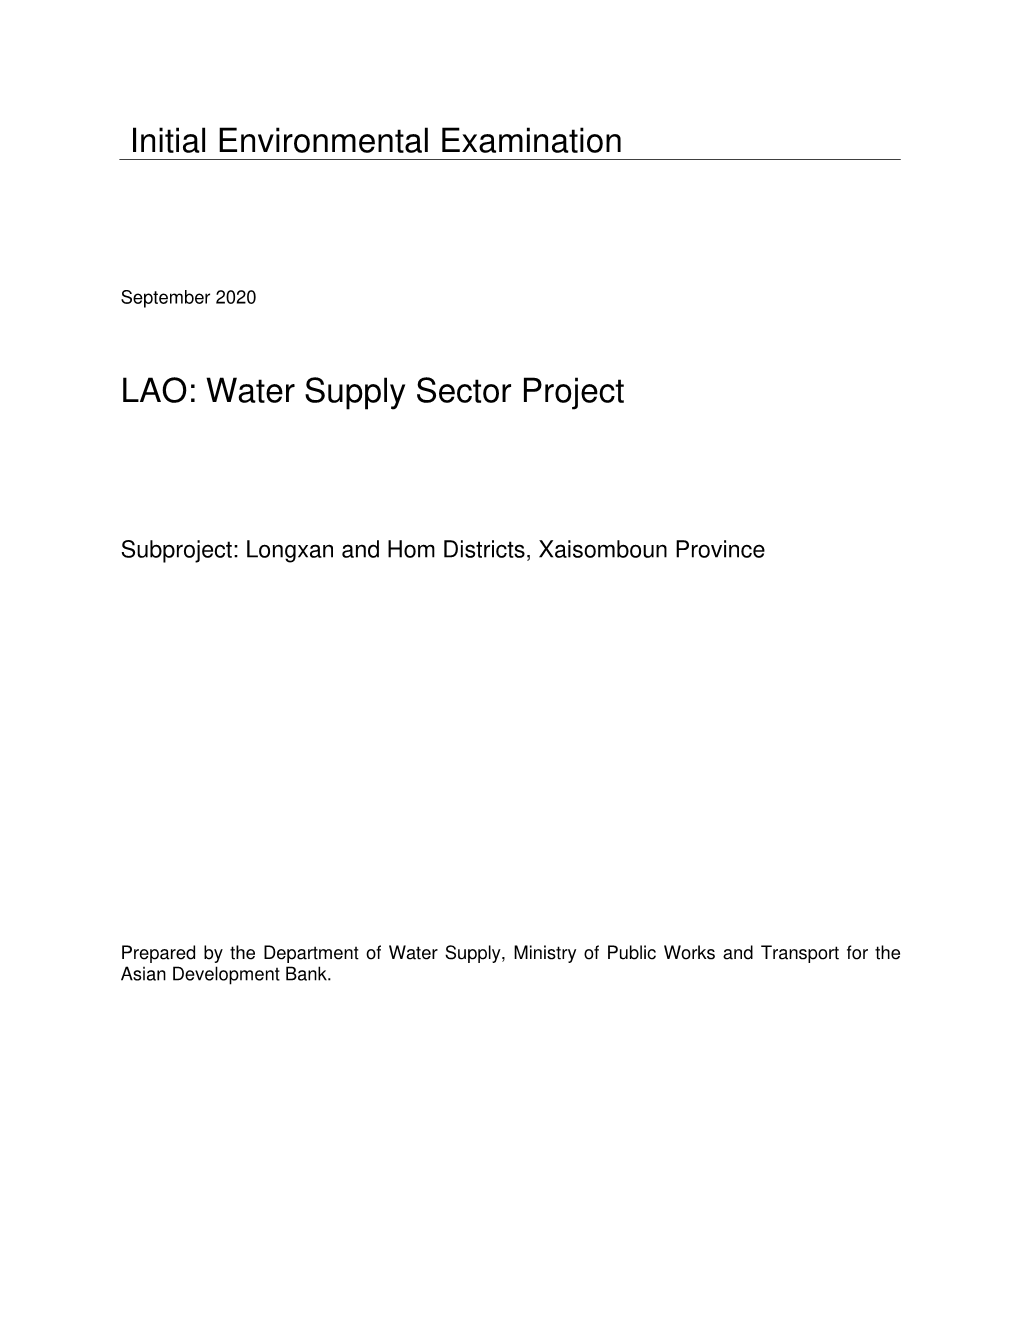 Water Supply Sector Project: Longxan and Hom Districts